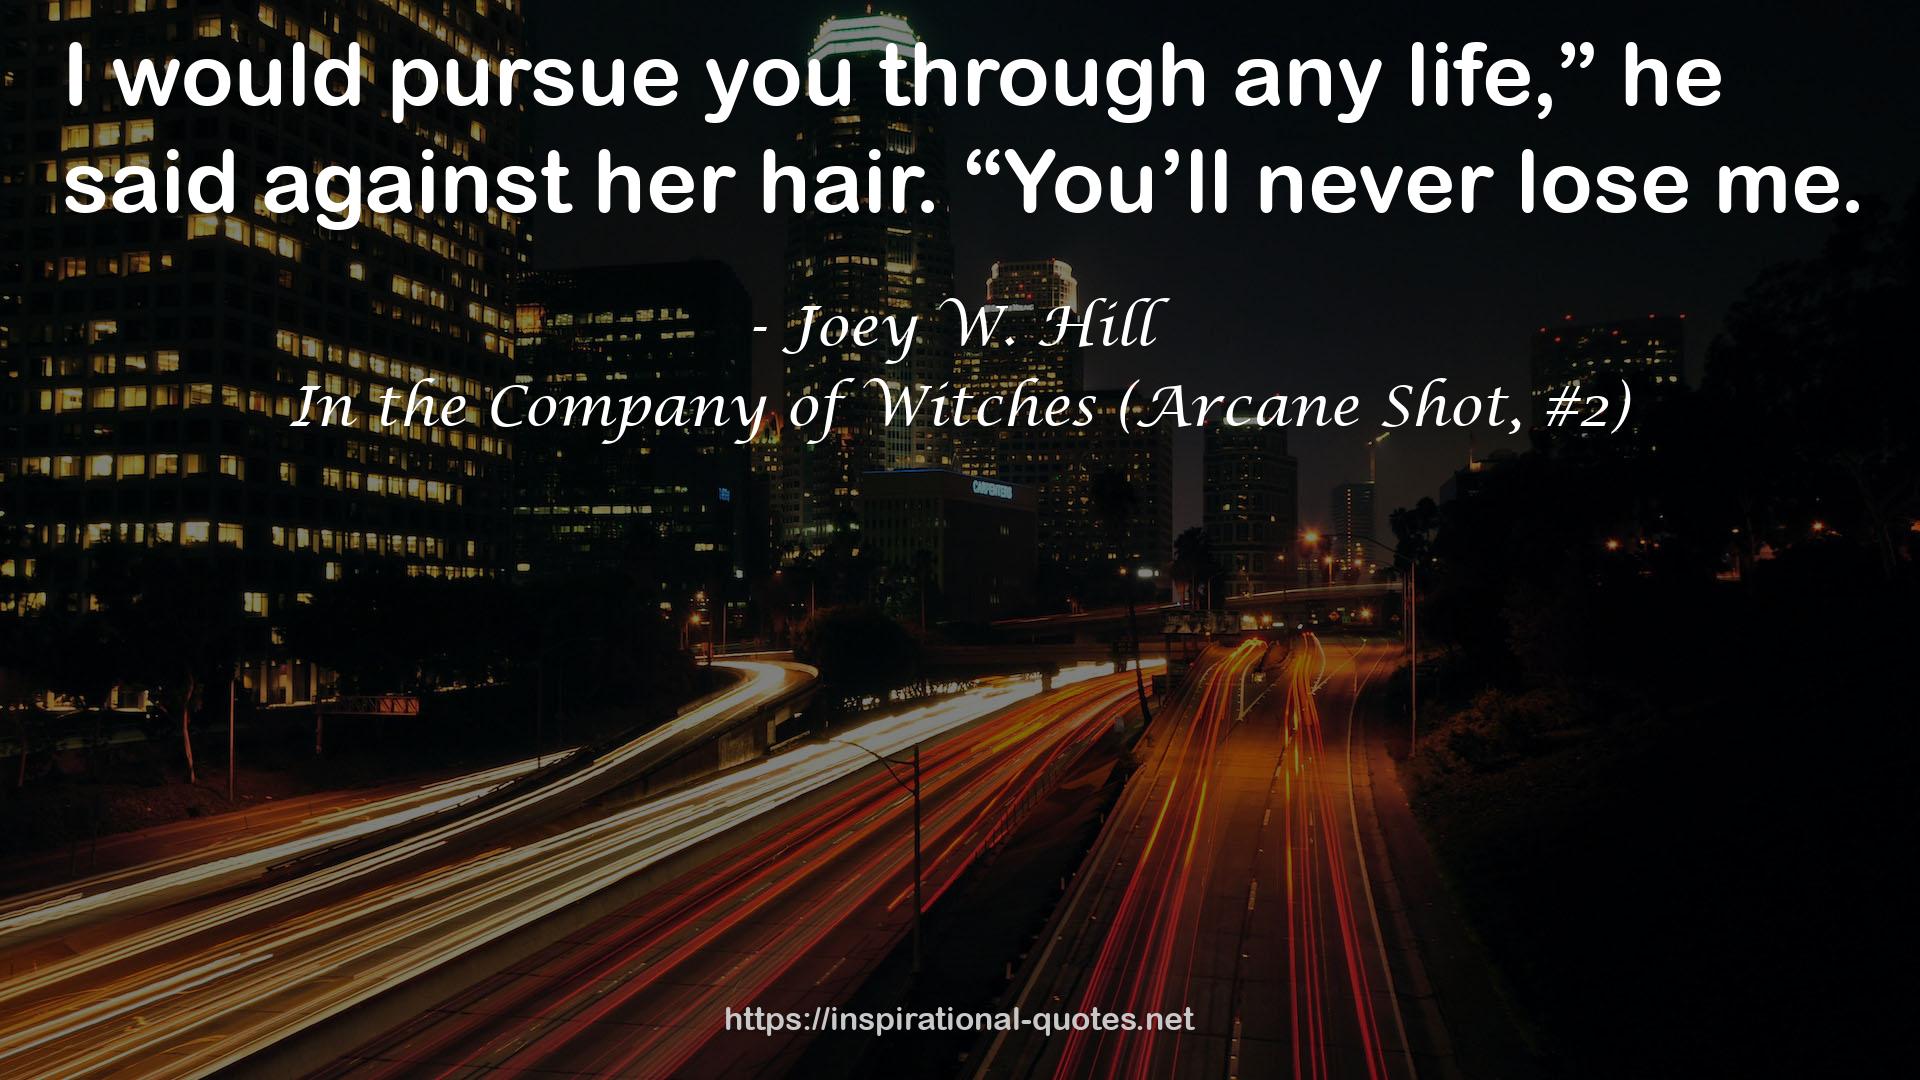 In the Company of Witches (Arcane Shot, #2) QUOTES